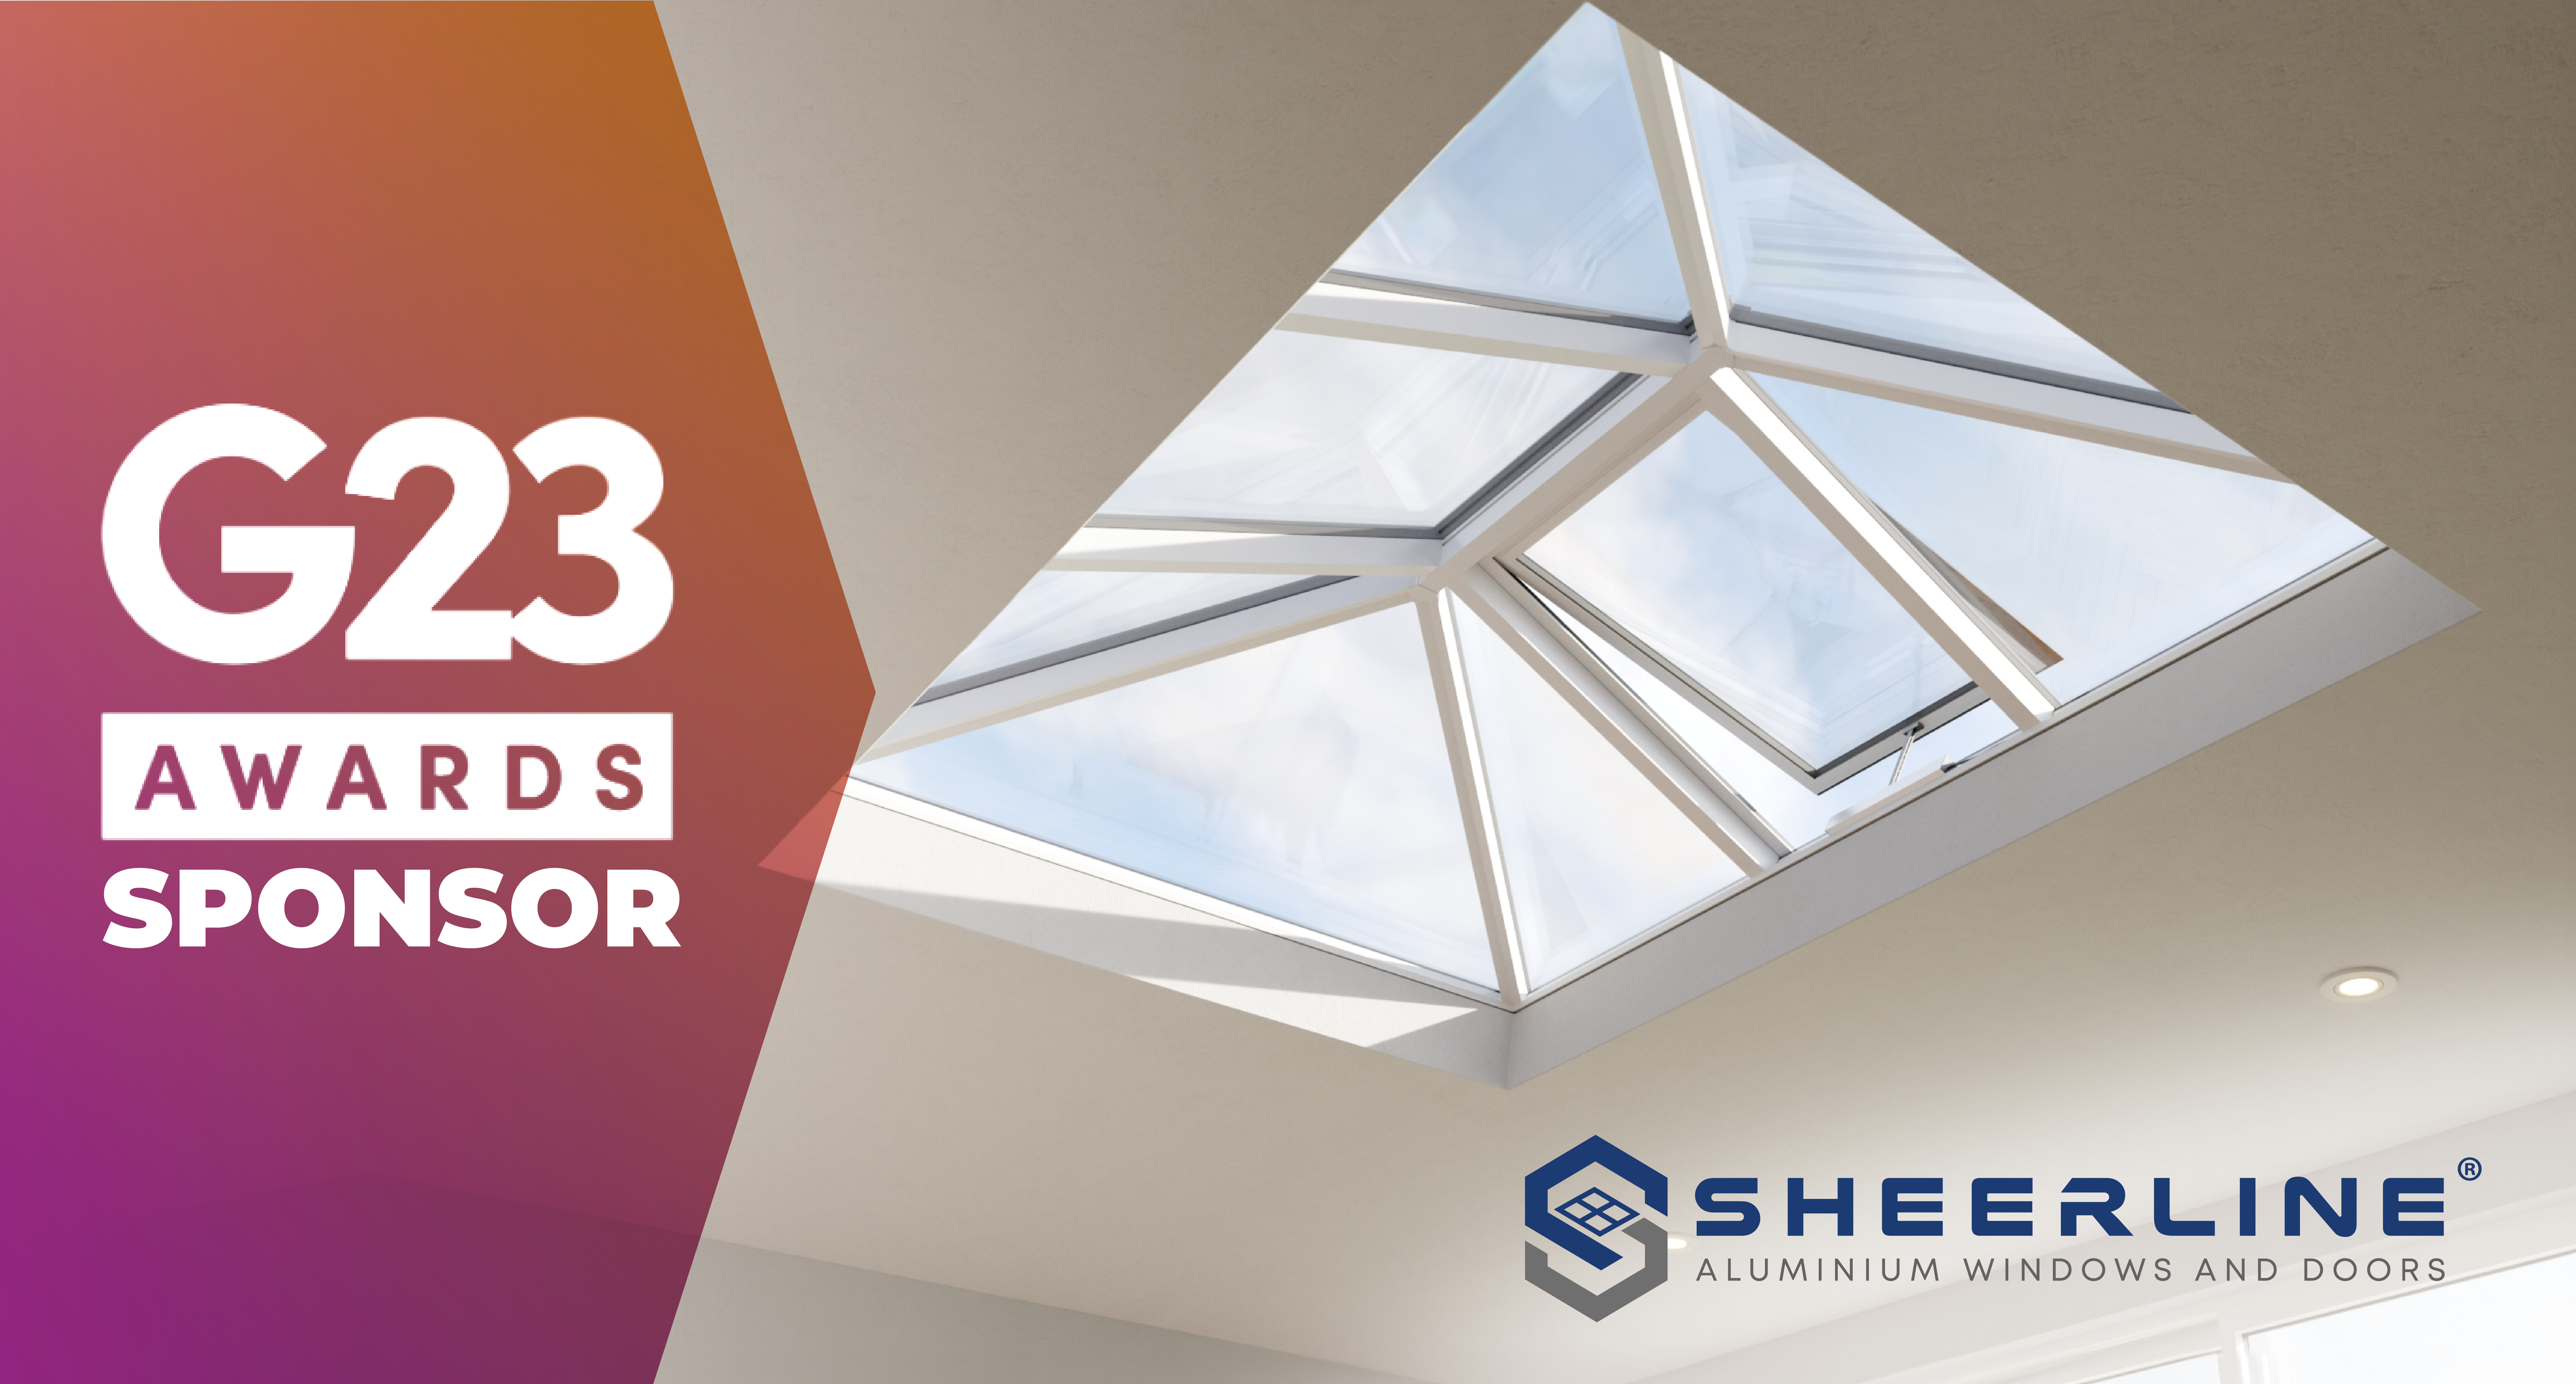 Sheerline Celebrates Best of Glass and Glazing as a Main Sponsor of G23 Awards in November